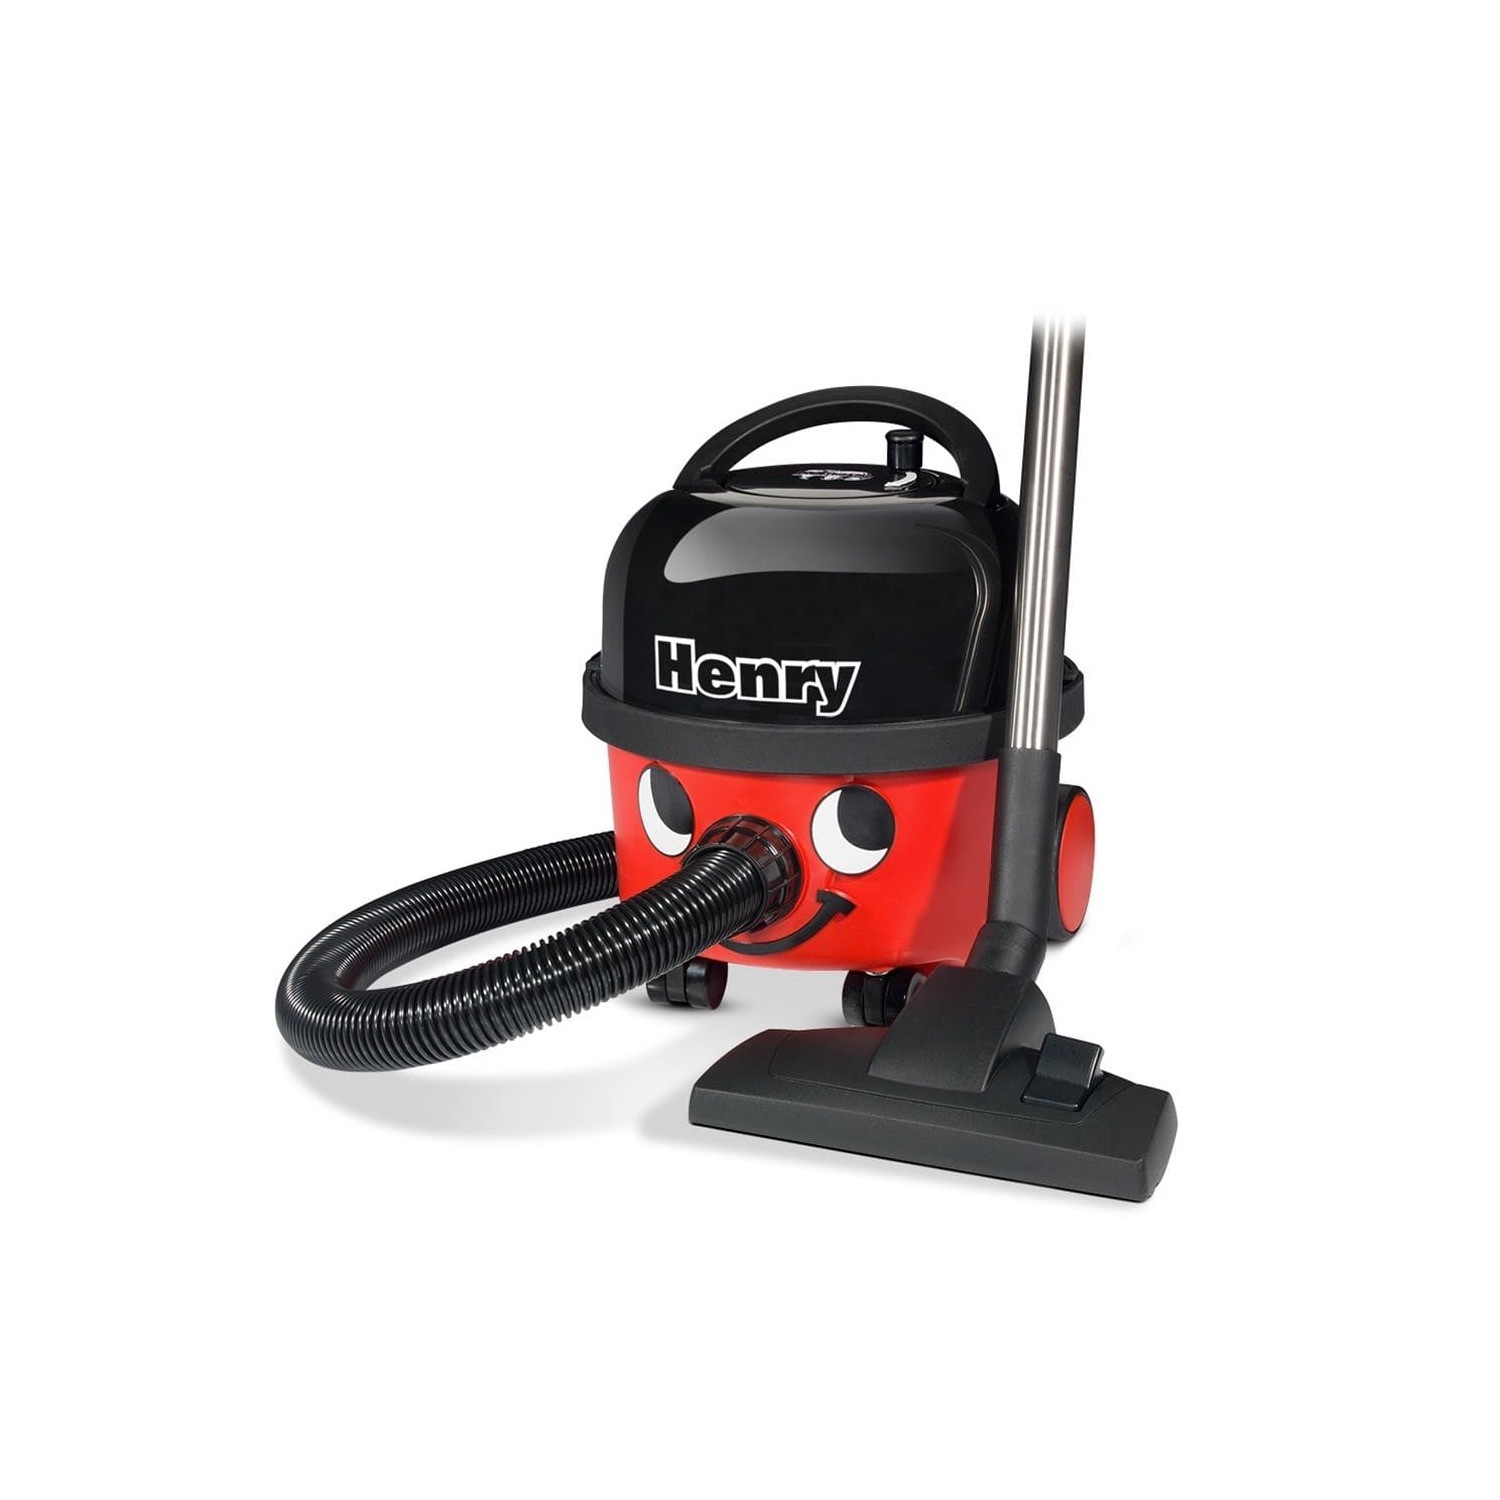 Numatic Henry Bagged Vacuum Cleaner - Red